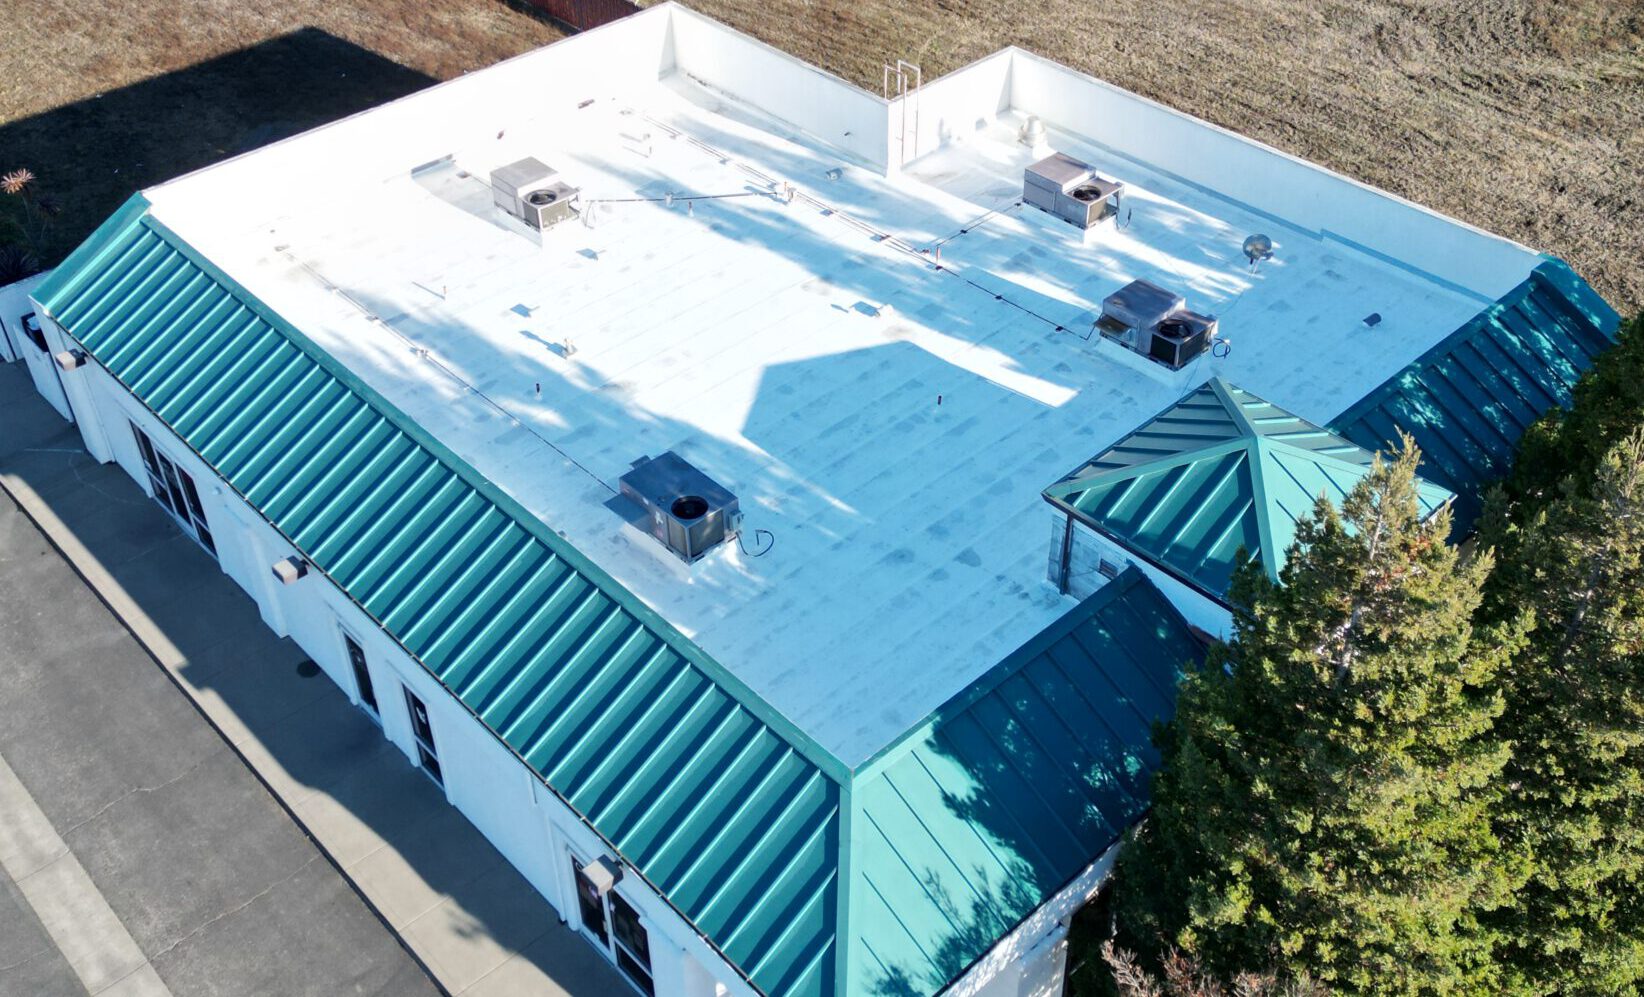 Silicone coating roof replacement new roof re-roof roofing contractor roofing company roofer reroof